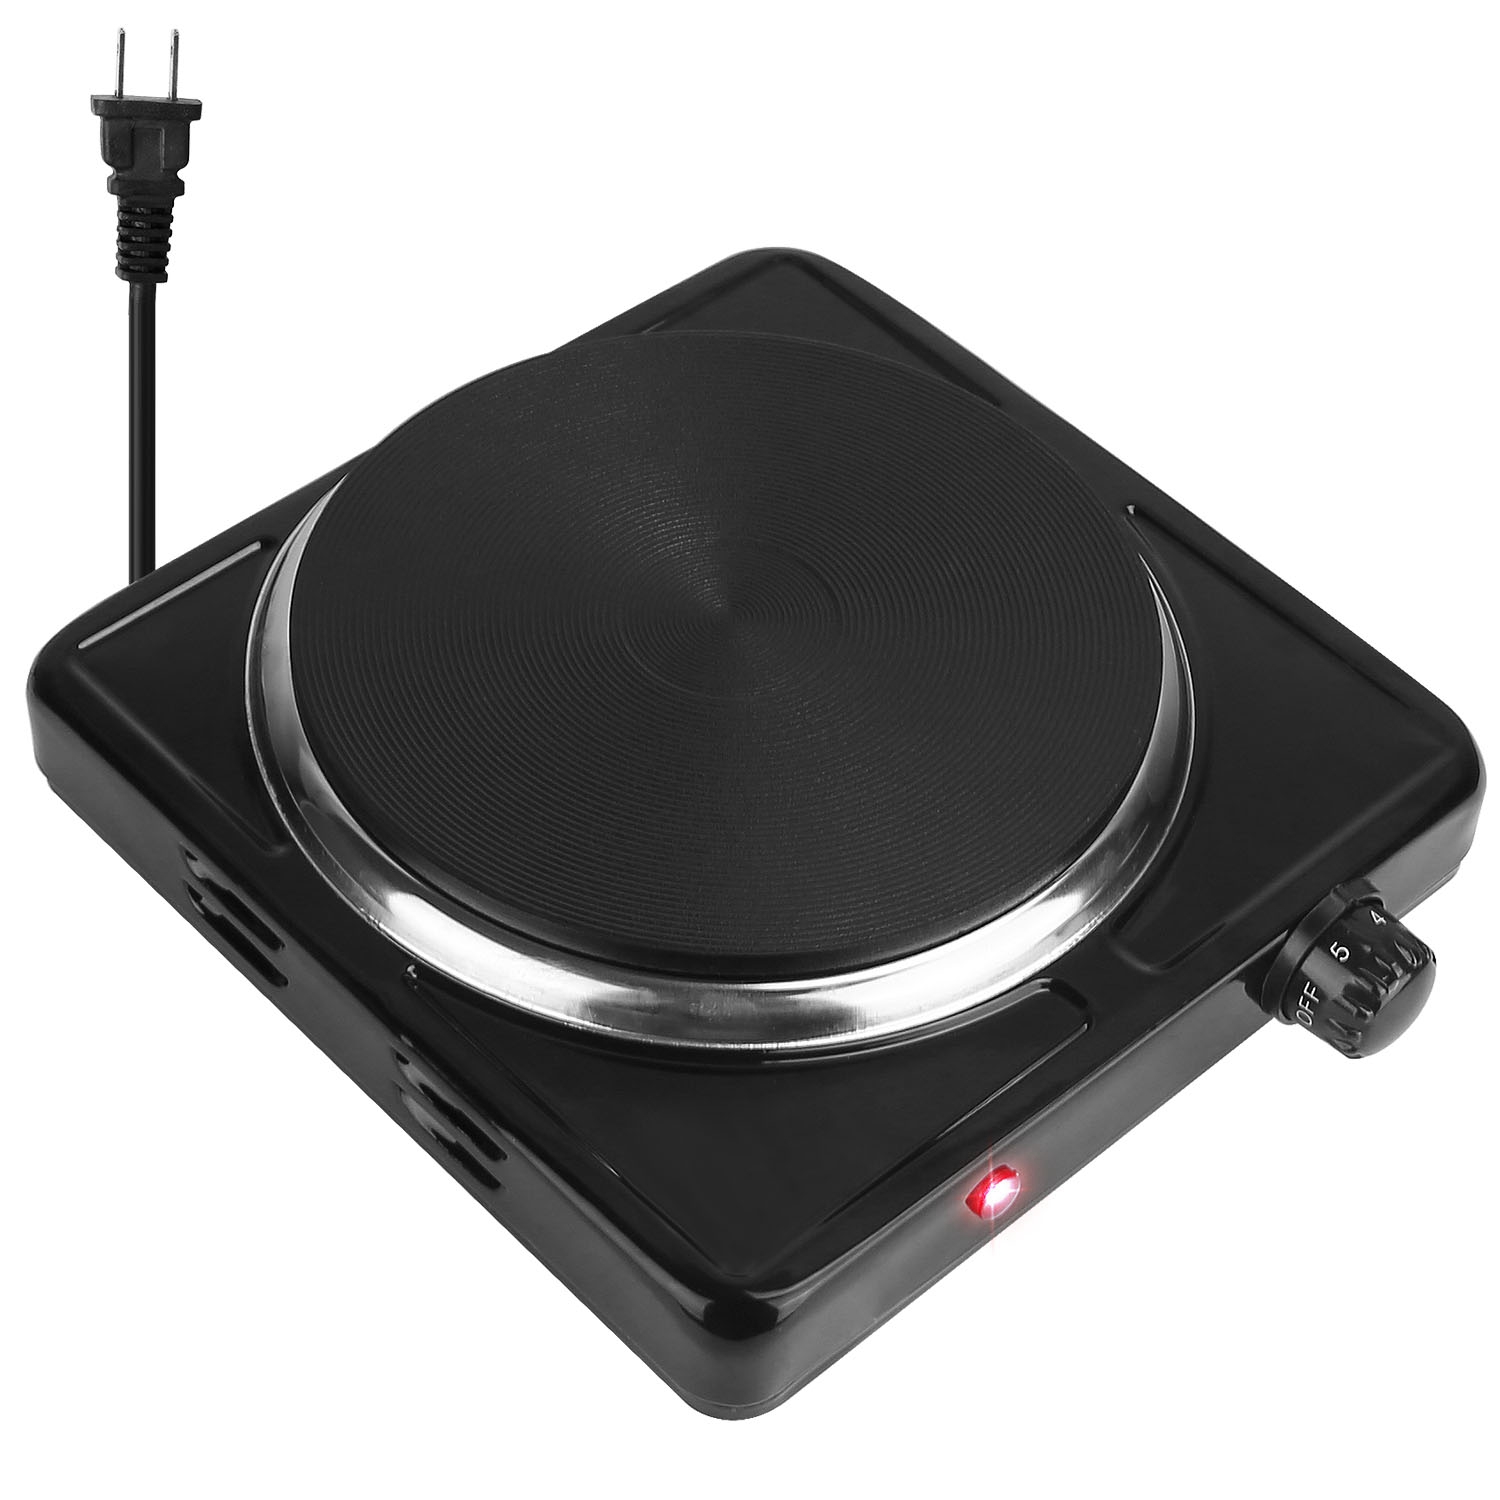 1500W Electric Single Burner Portable Heating Hot Plate Stove Countertop RV Hotplate with Non Slip Rubber Feet 5 Temperature Adjustments